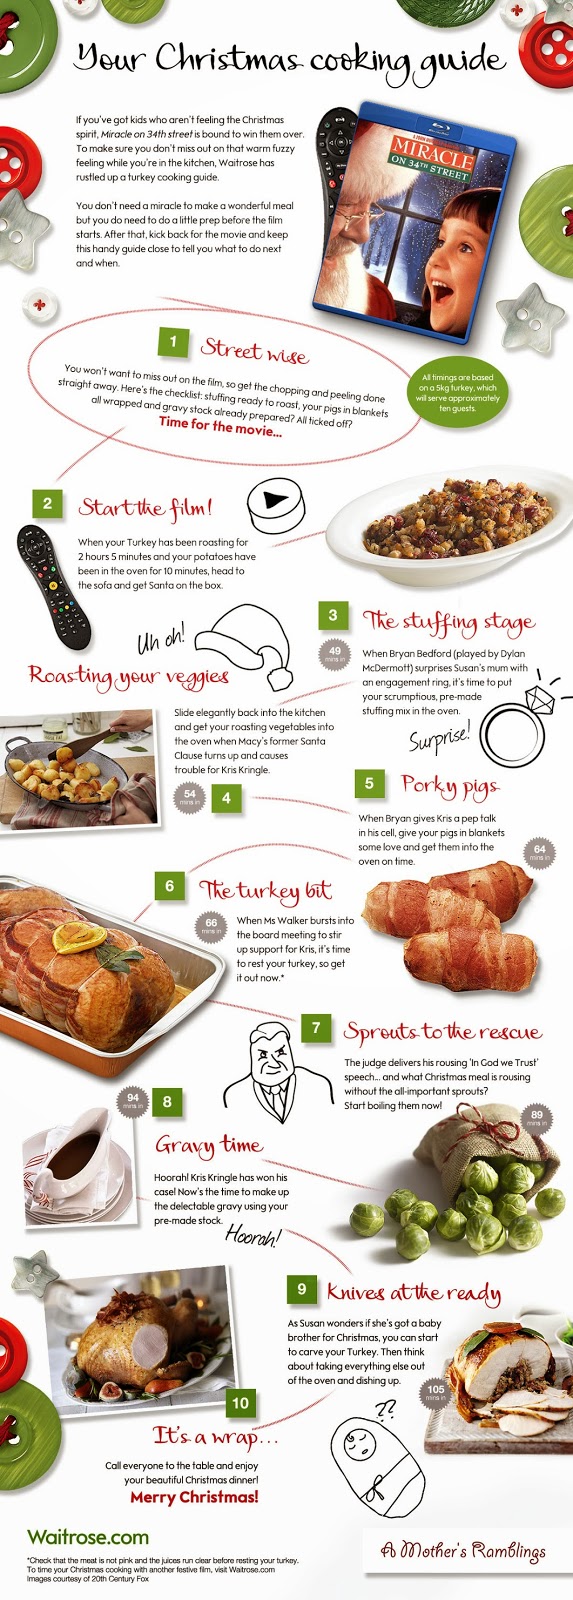 Turkey Timings Infographic by Waitrose and A Mother's Ramblings